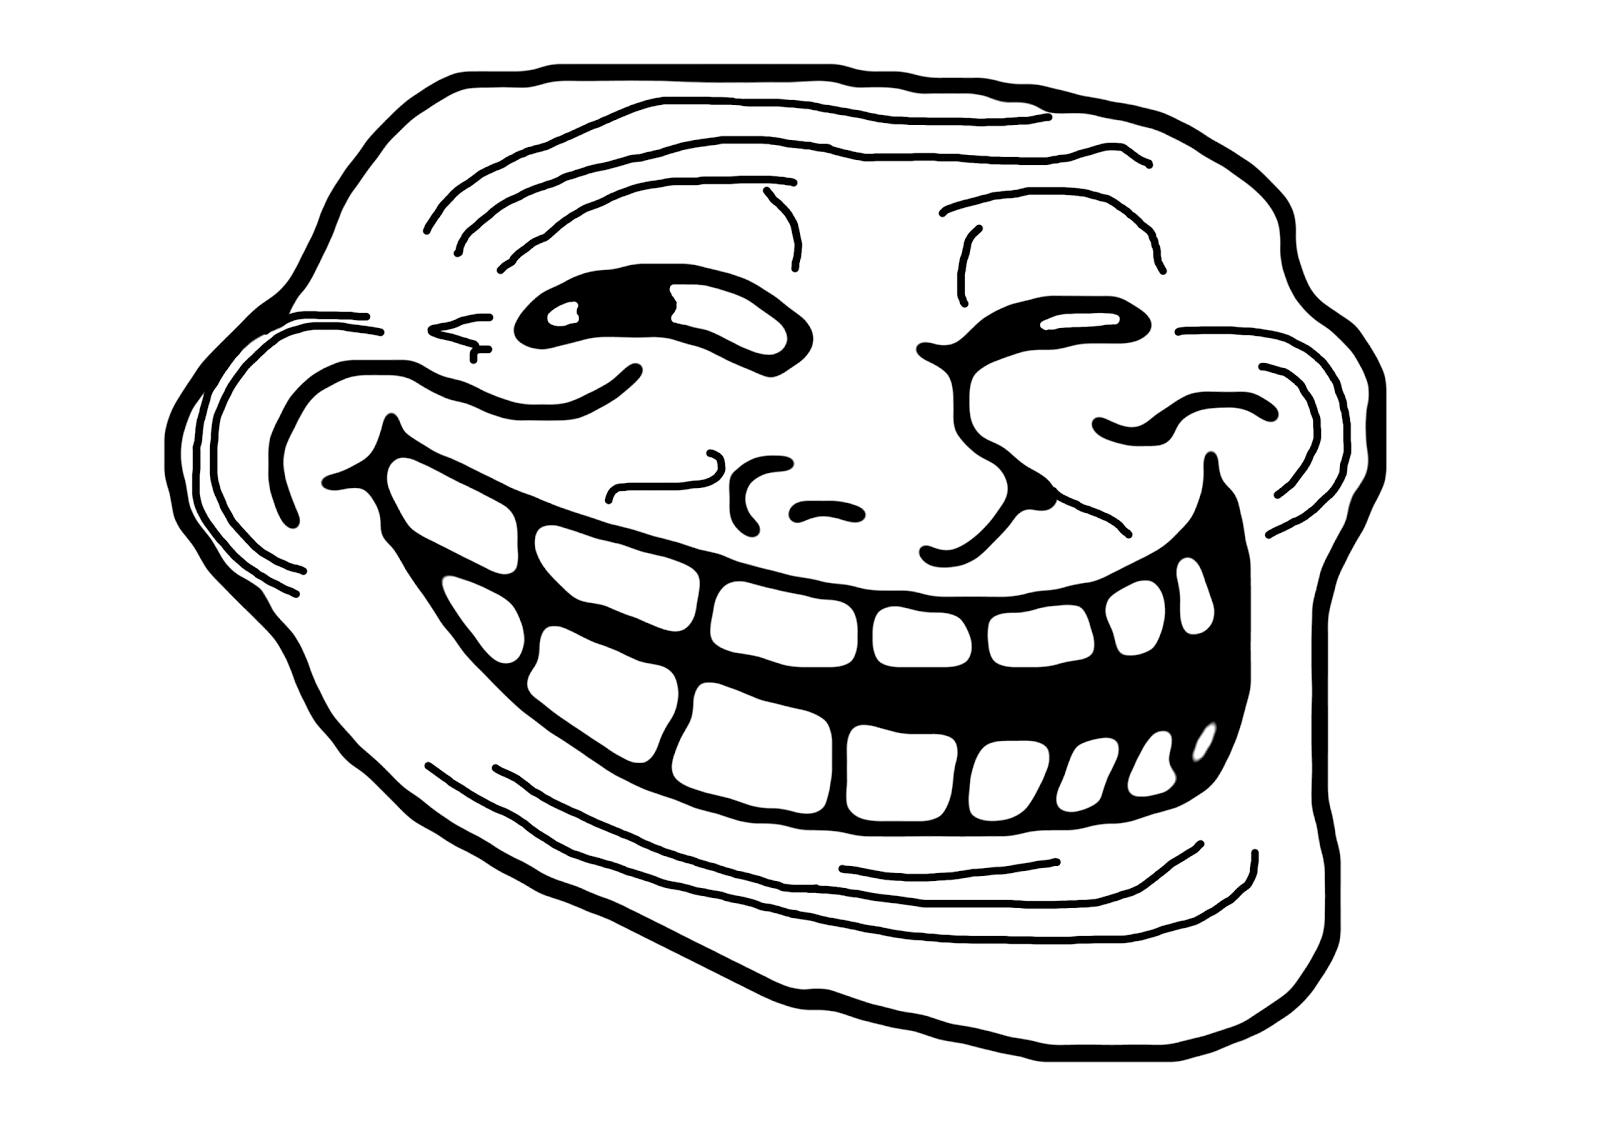 Troll-face-4.png